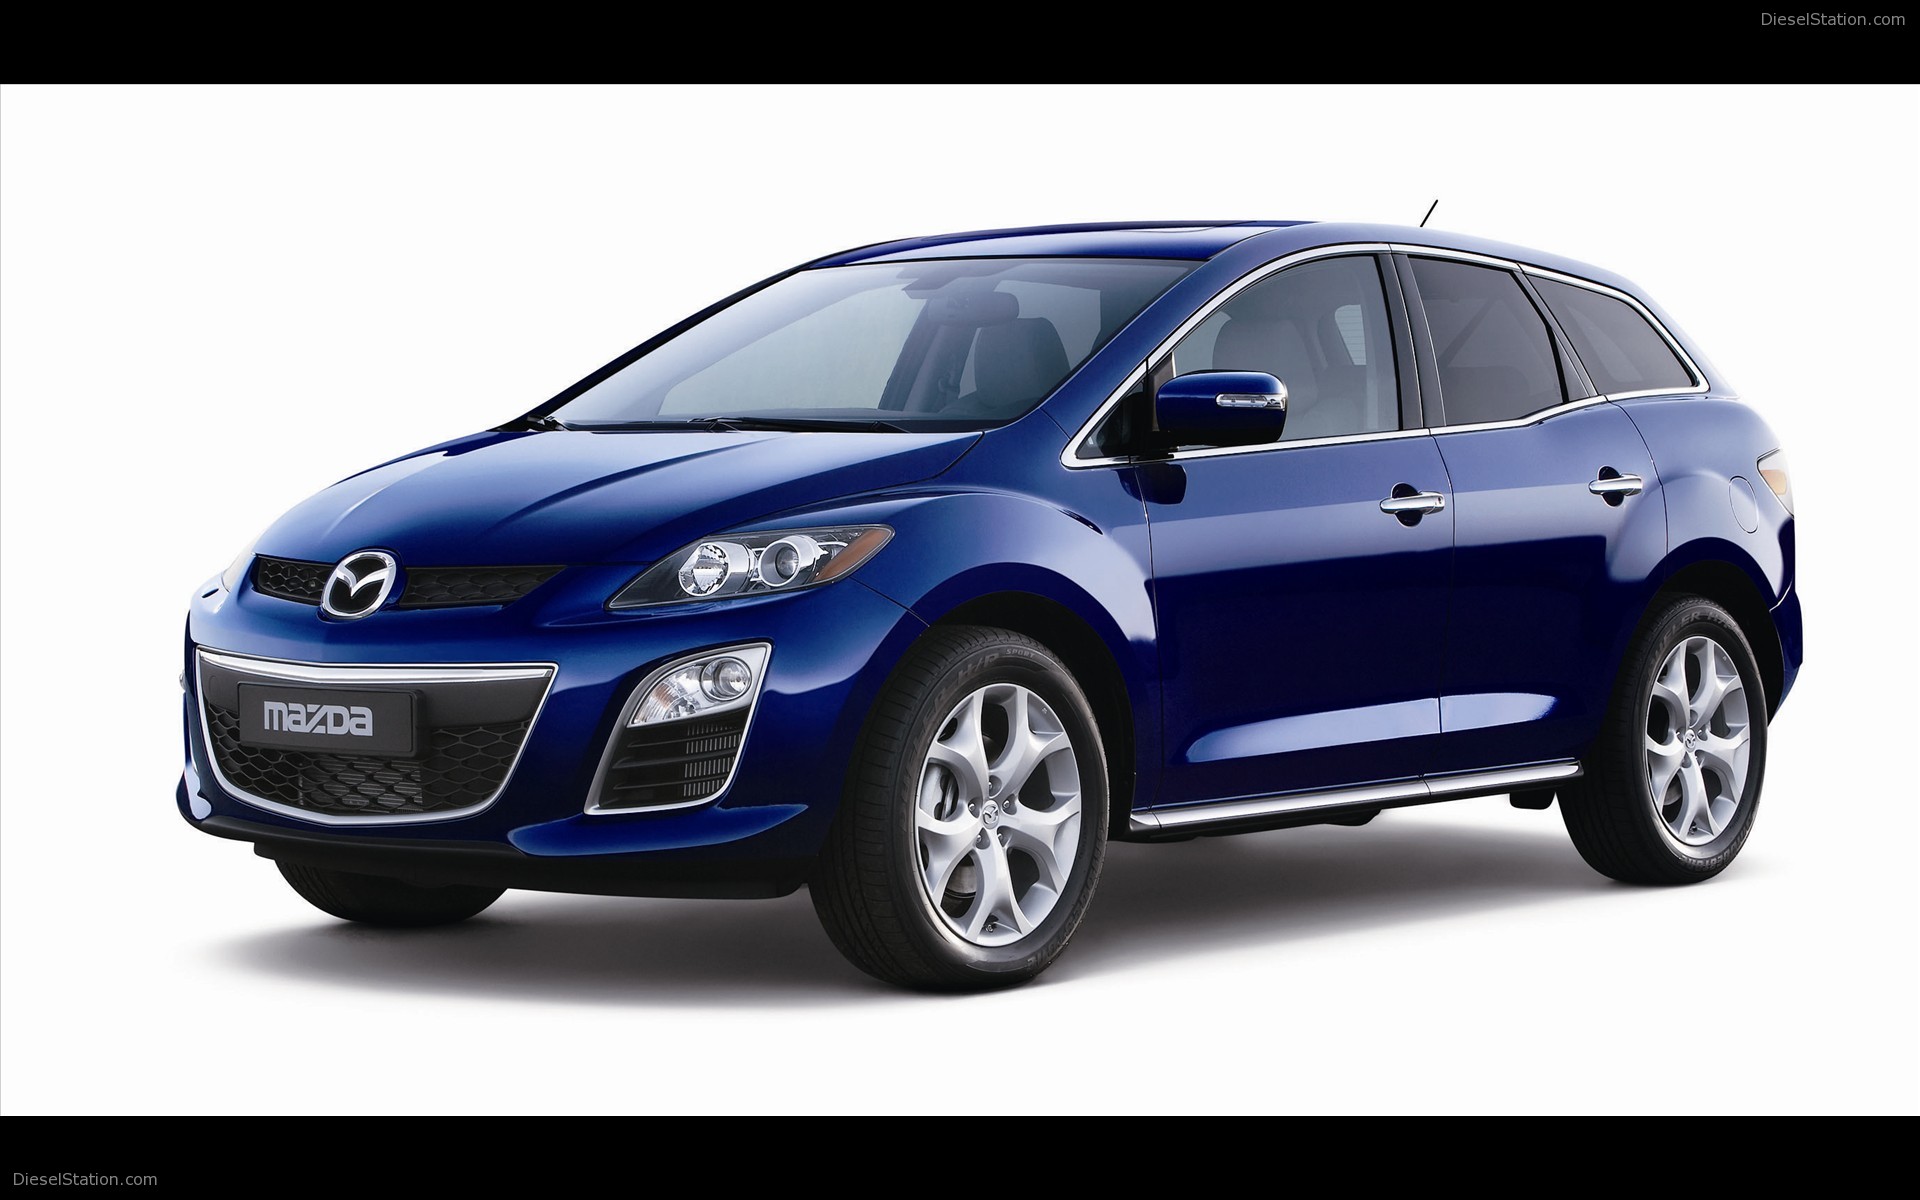 Mazda CX7 Diesel technical details, history, photos on